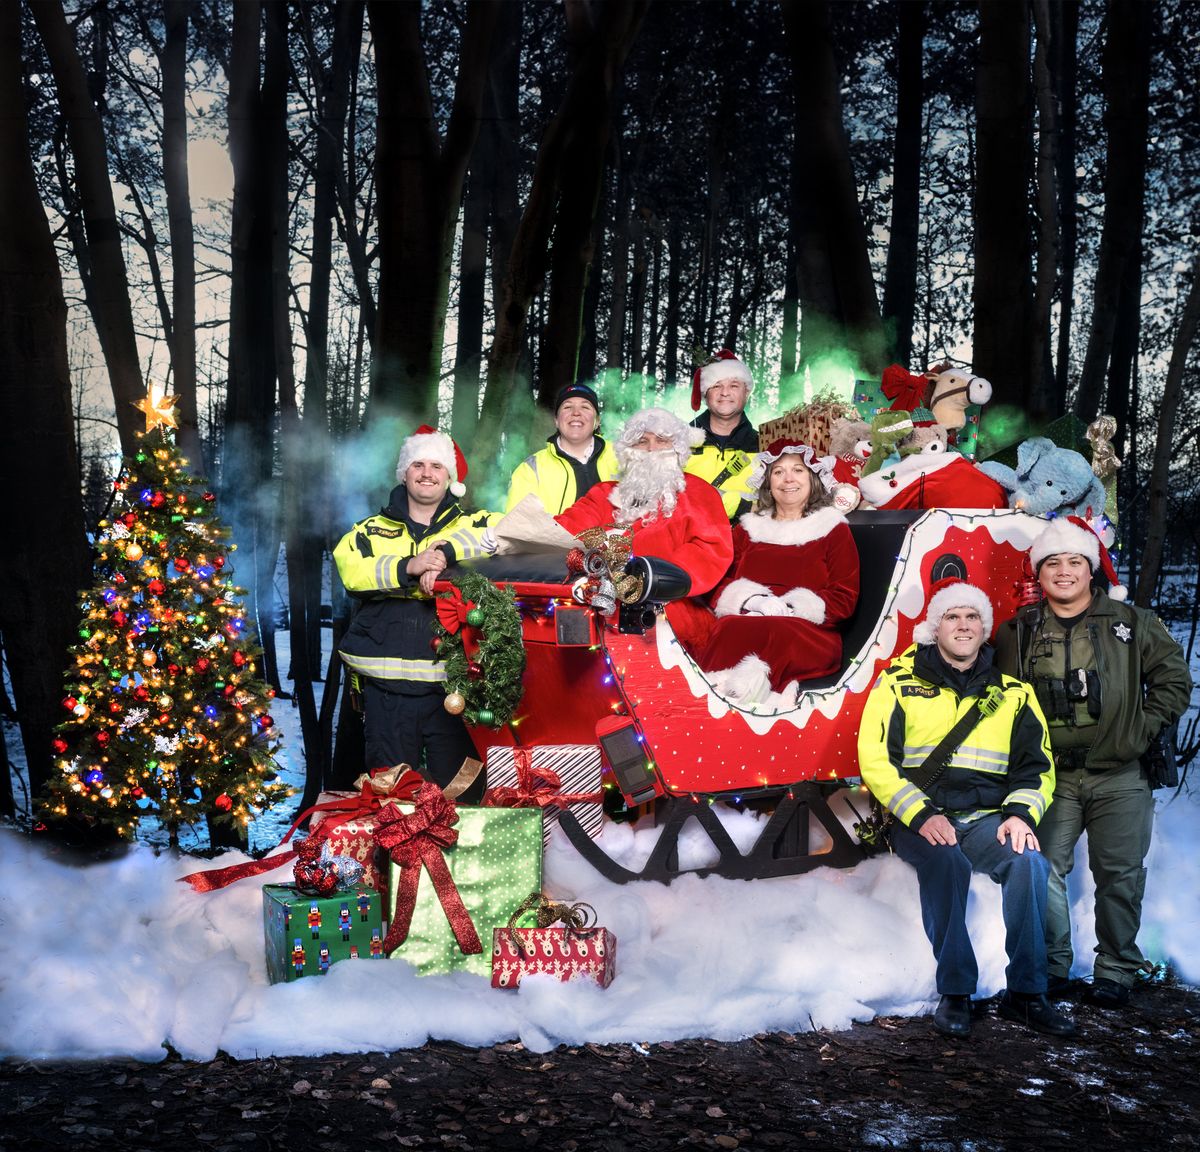 Nestled in a grove of charred birch trees in Medical Lake’s Waterfront Park, first responders to the Gray Fire gather to bring some holiday cheer to wildfire affected community. Left to right top: firefighter Charles Johnson, EMT Erica Norris and firefighter Marcus Lazzar. Middle: Firefighter Hanson Johnson and mayor Terri Cooper. Bottom: Firefighter Aaron Porter and Deputy Lorenz Mina.  (COLIN MULVANY/The Spokesman-Review)